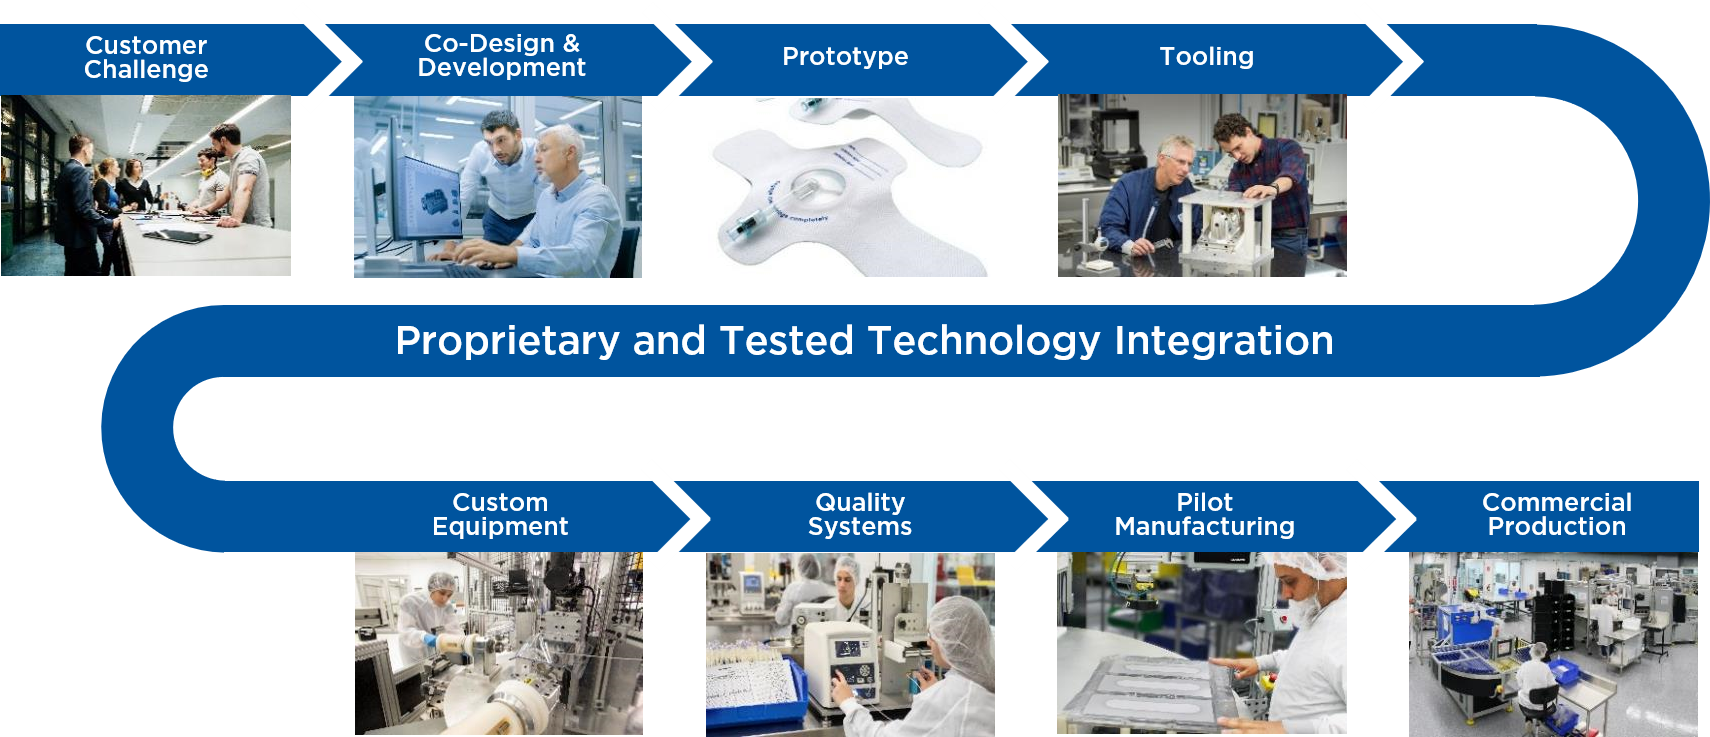 Our Process: Customer Challenge, Co-Design & Development, Prototype, Tooling, Proprietary and Tested Technology Integration, Custom Equipment, Quality Systems, Pilot Manufacturing, Commercial Production